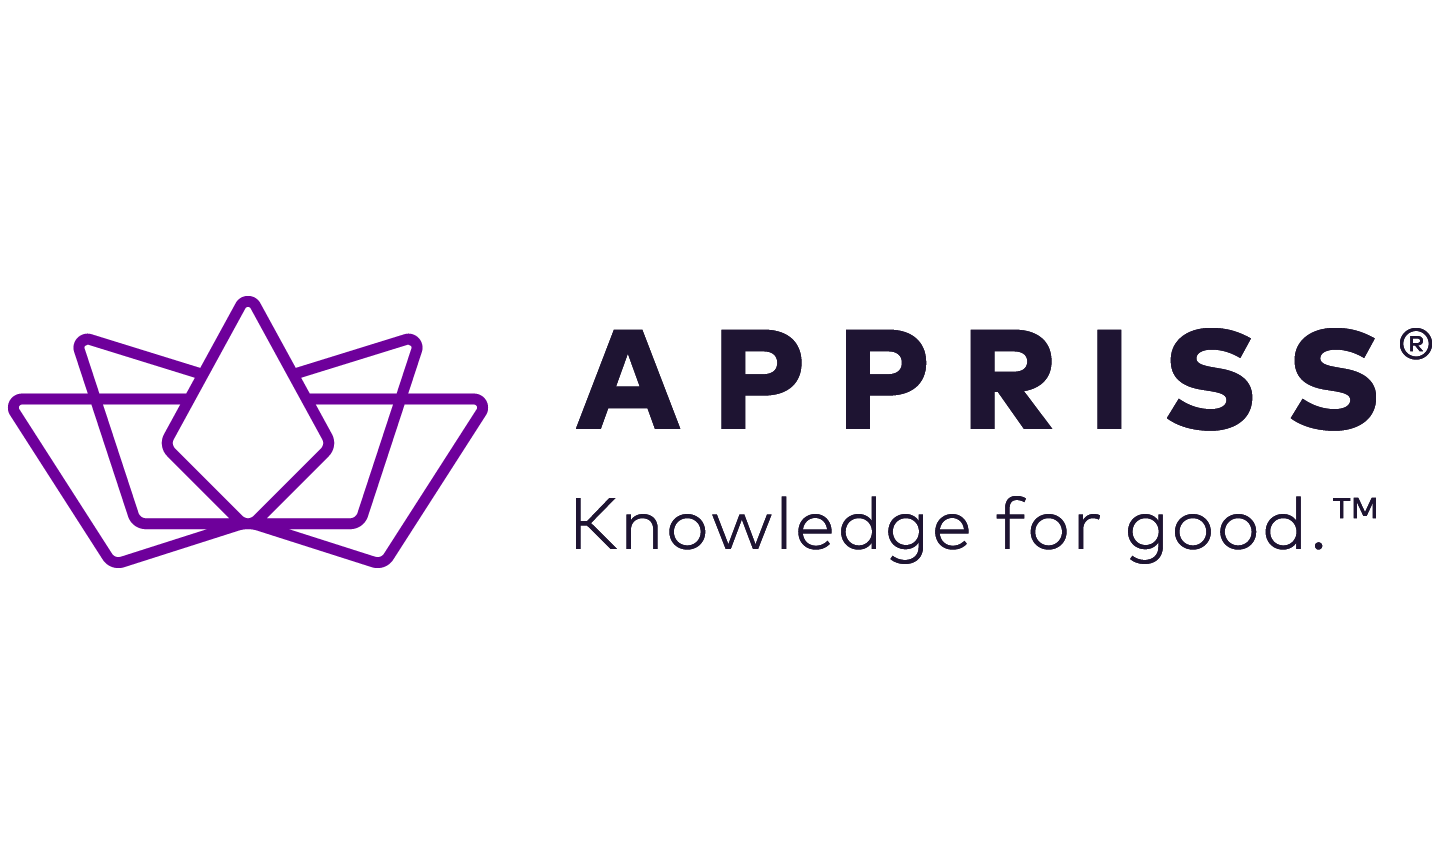 Appriss Logo - Appriss Home - Appriss is data and analytics, creating knowledge for ...